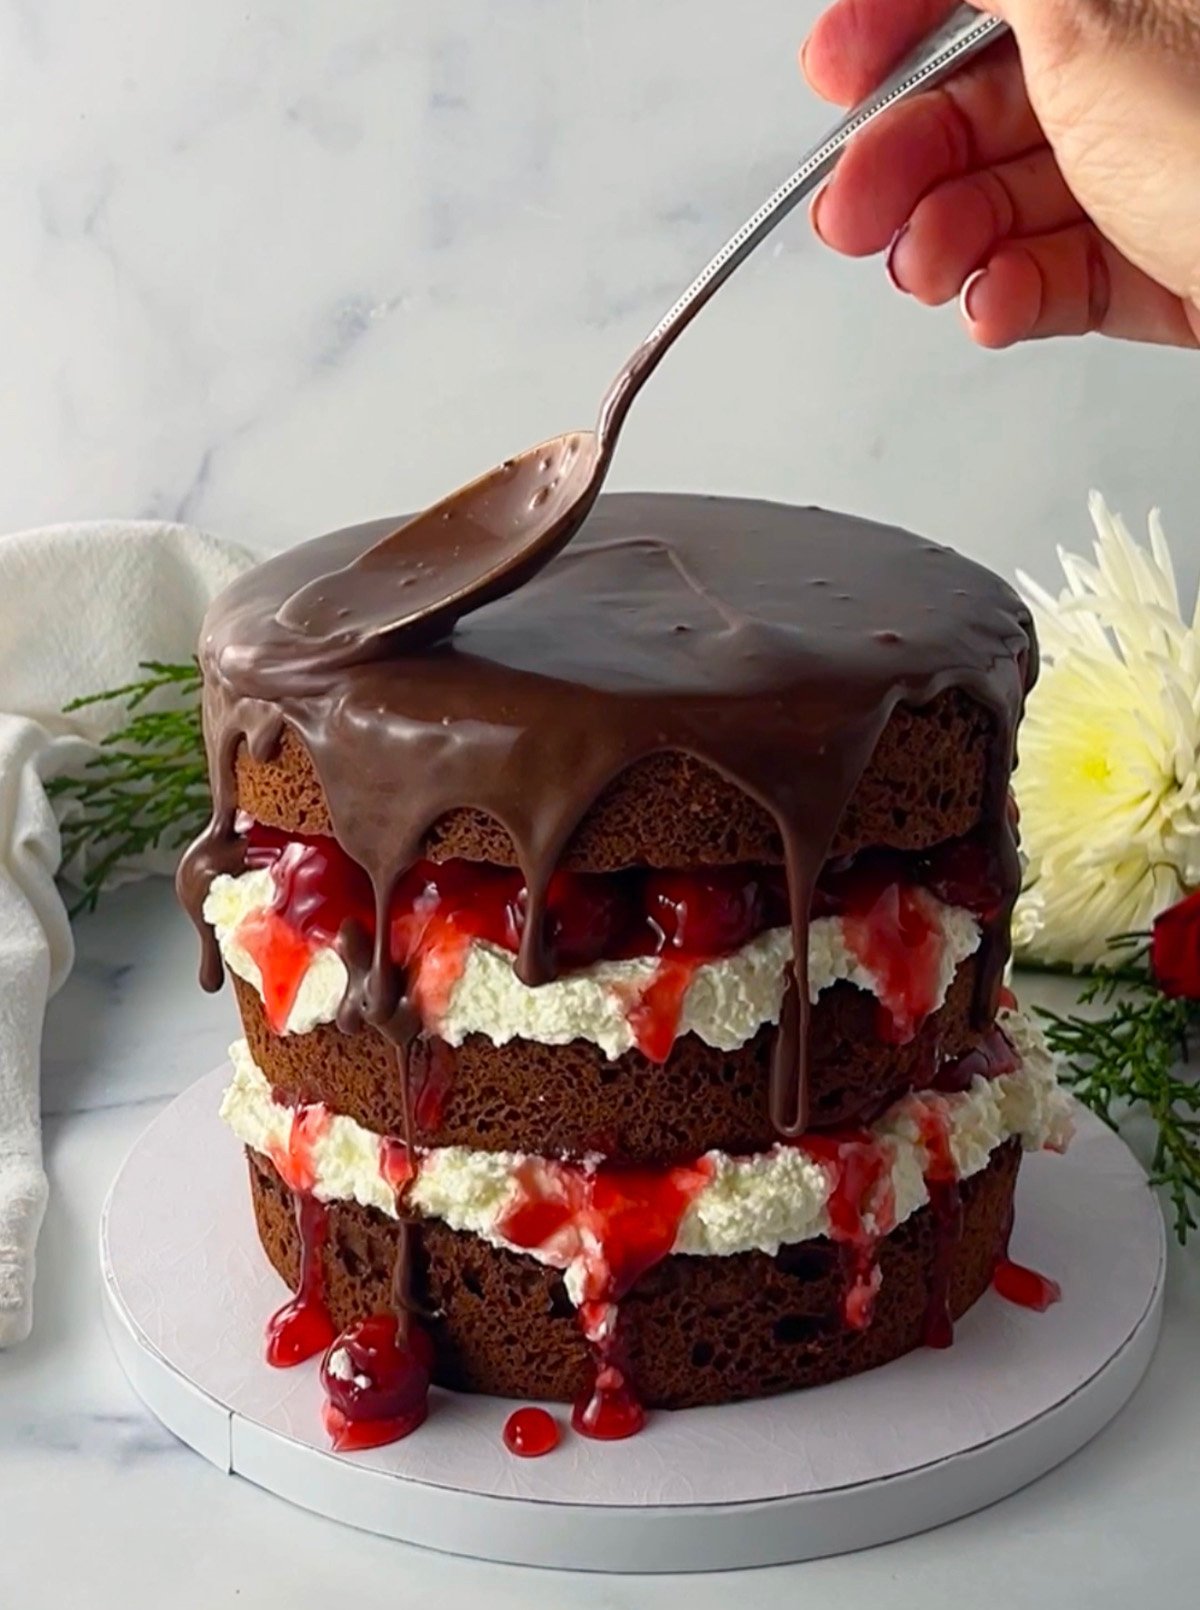 Pouring chocolate ganache over three layer black forest cake.